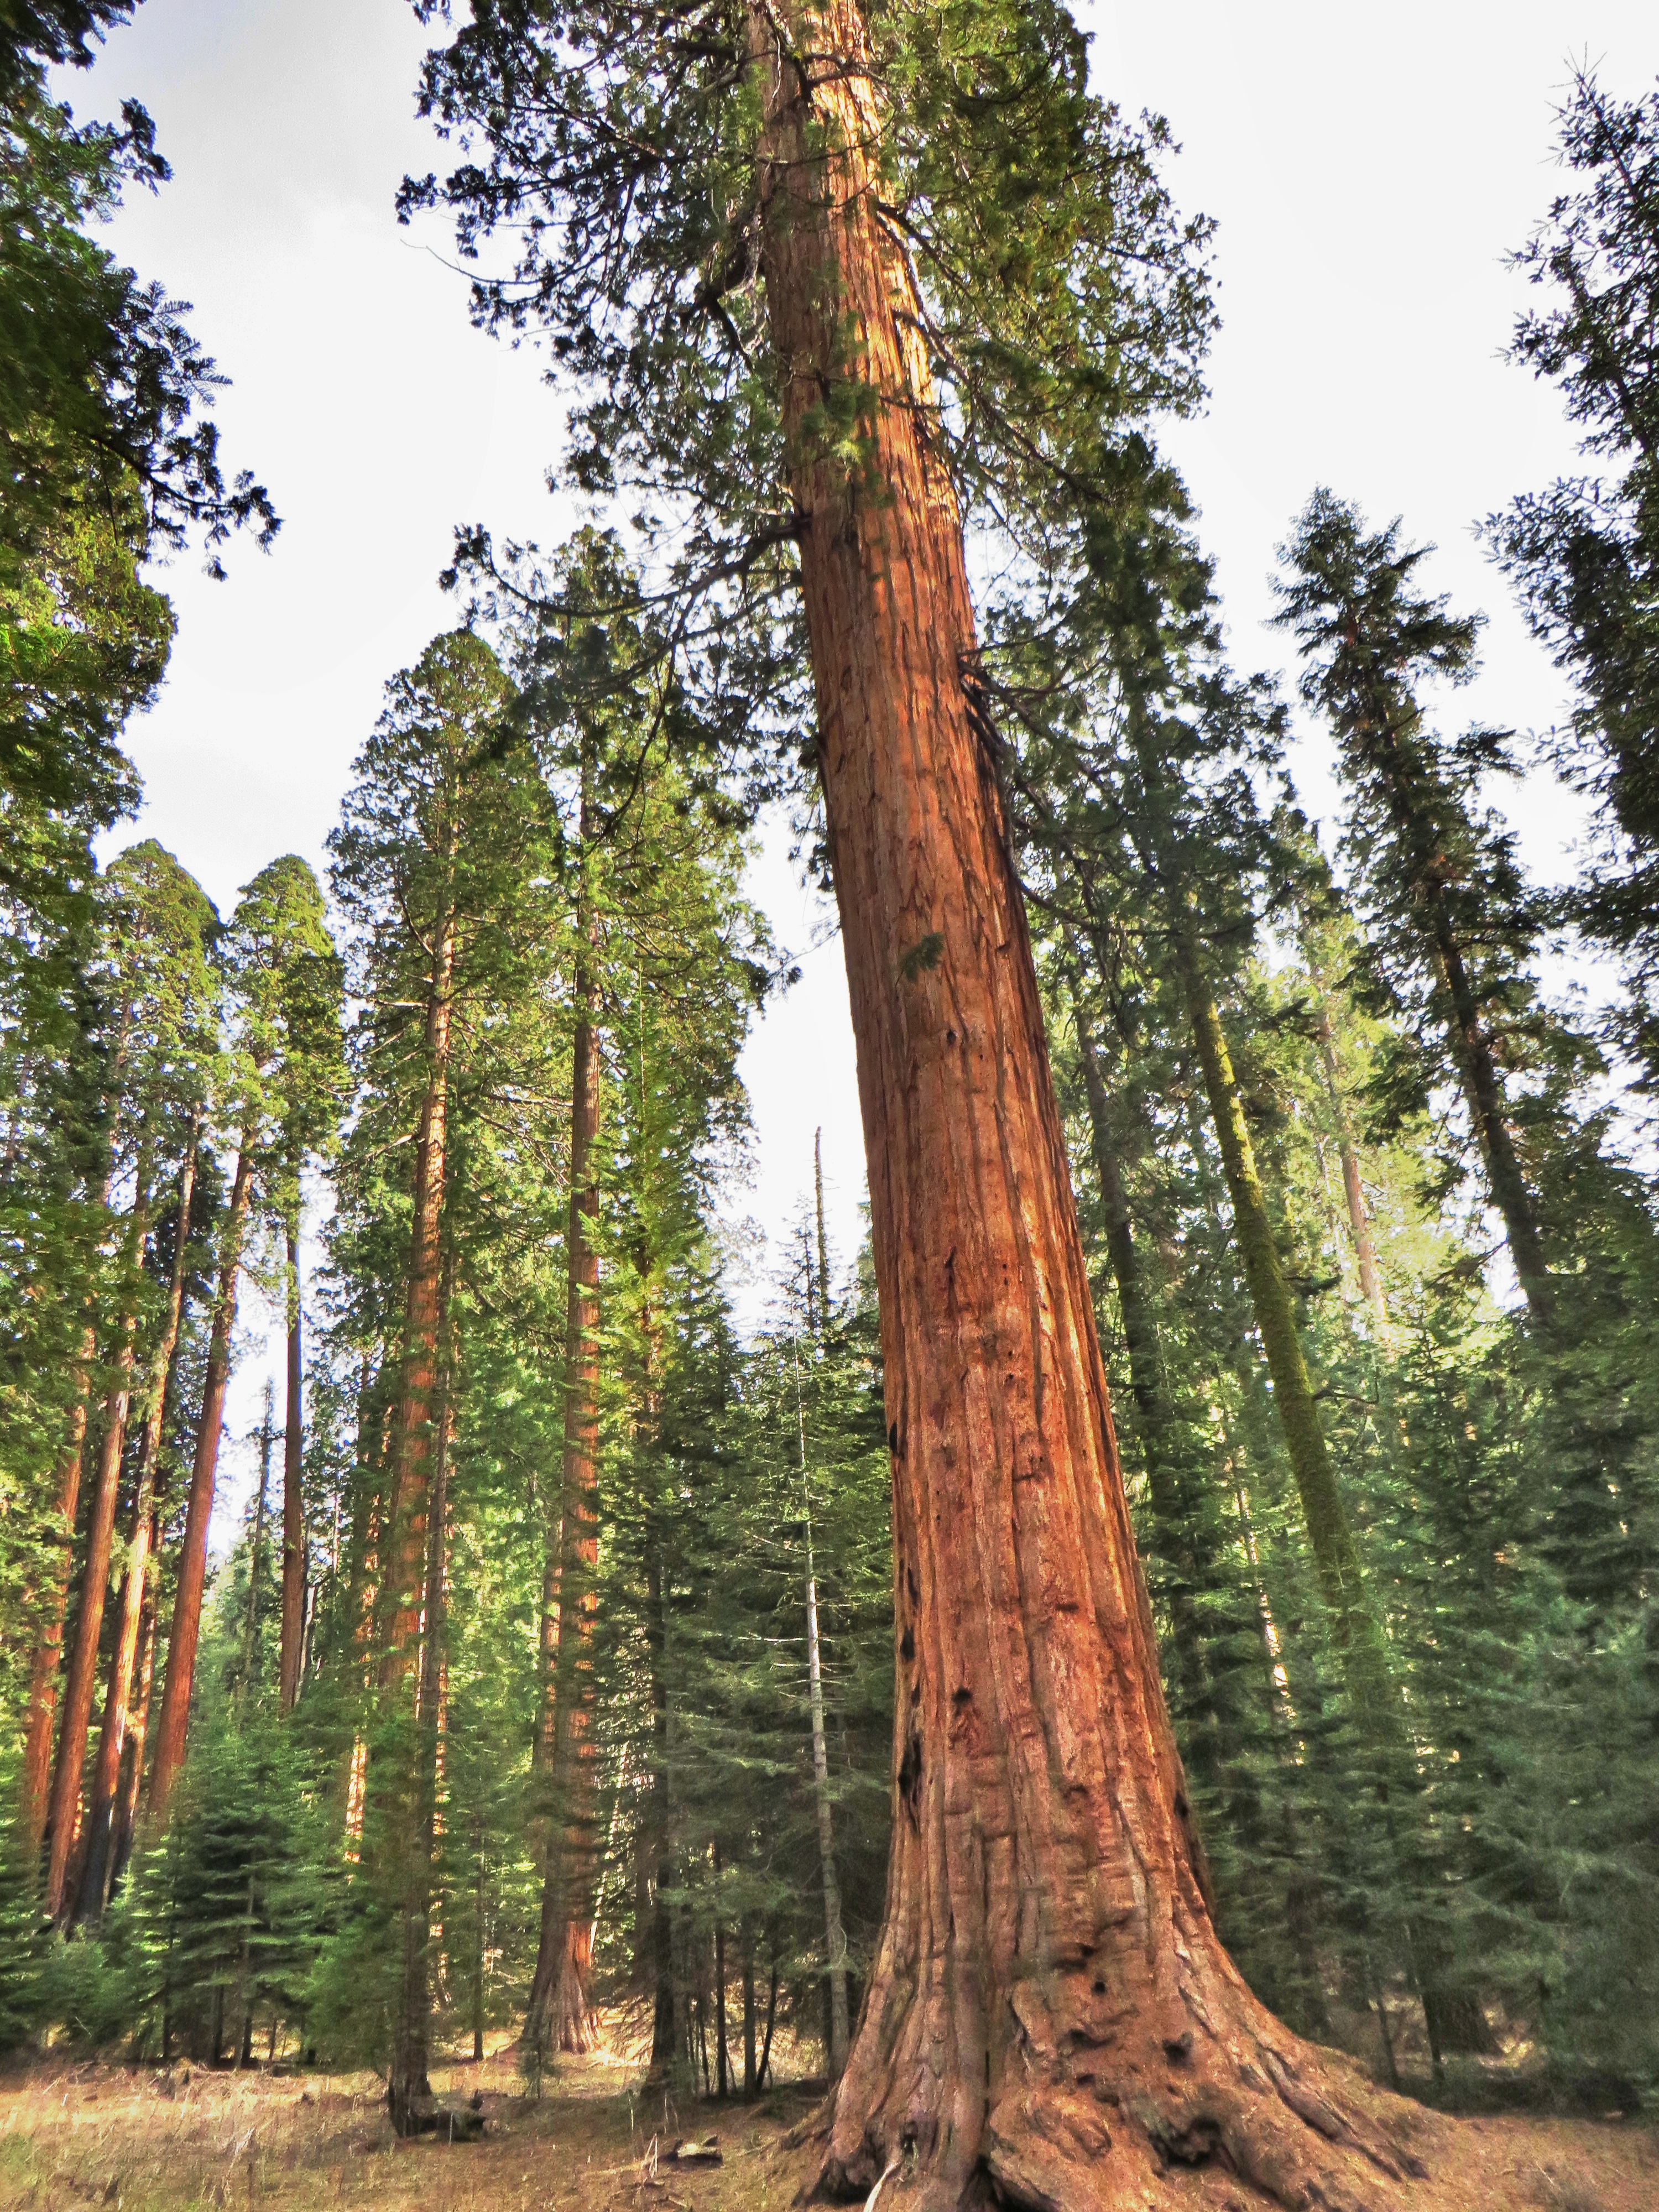 Day 31 – Sequoia National Park